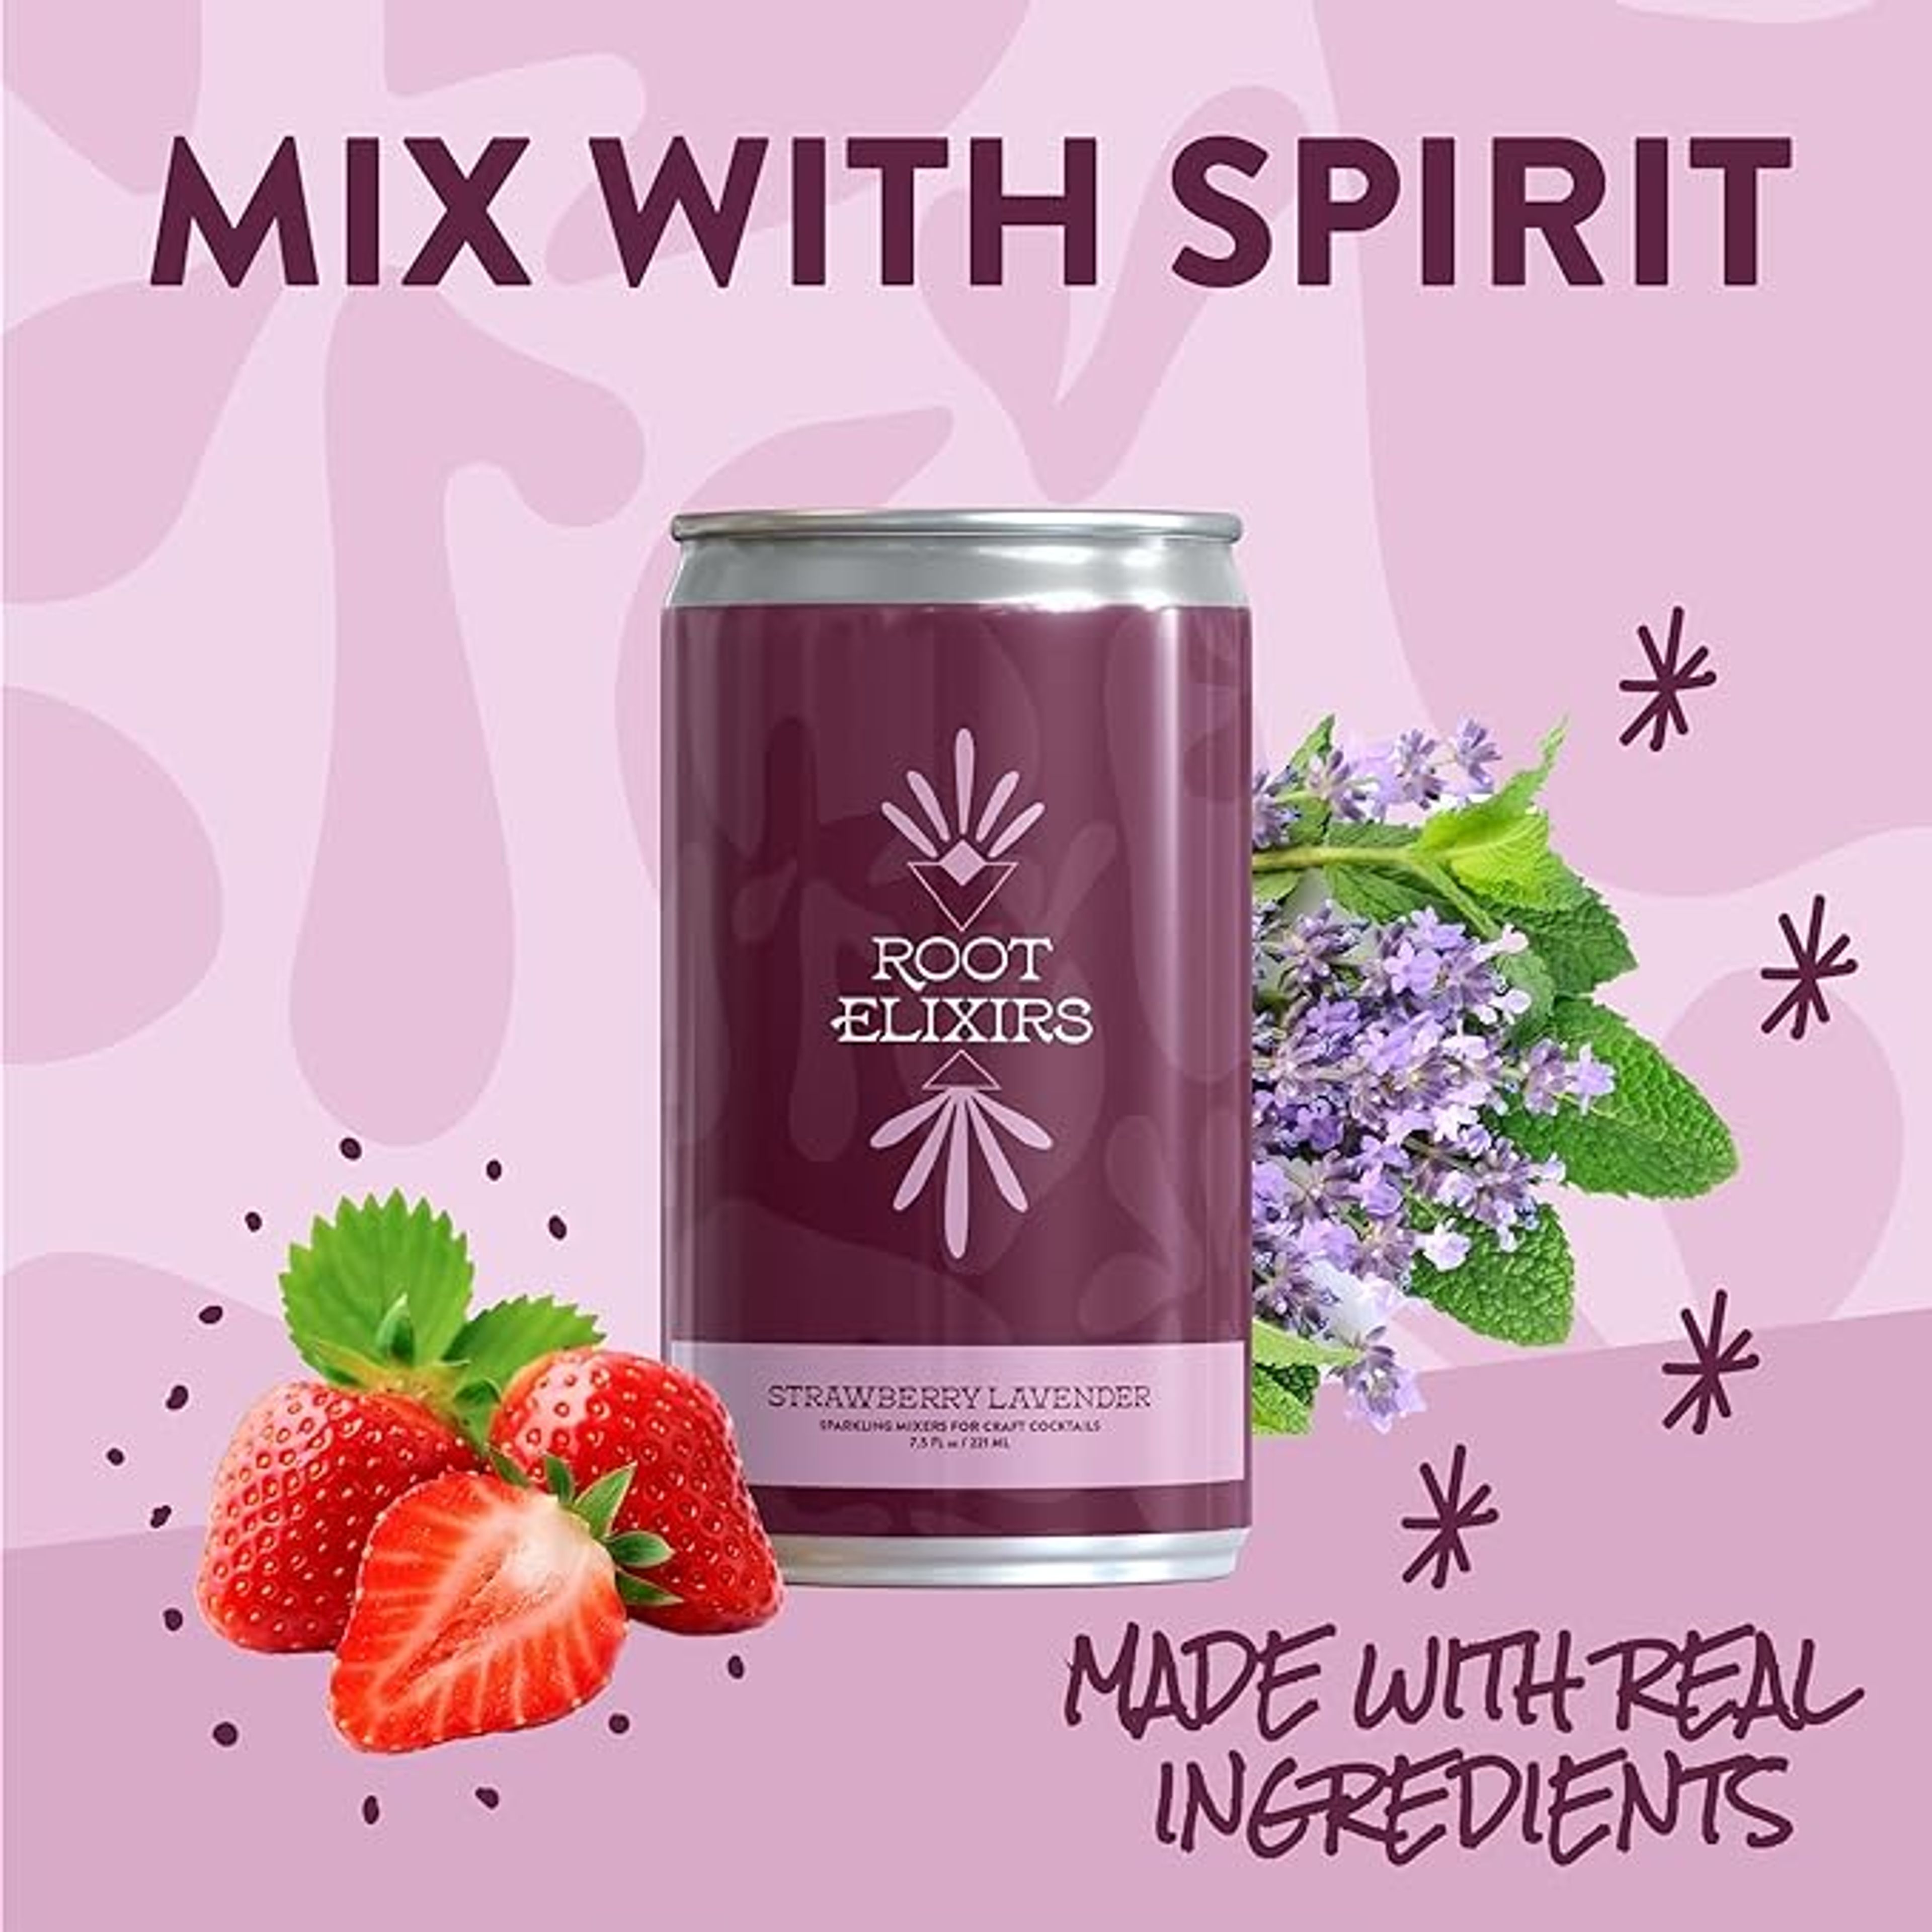 Root Elixirs Variety Pack | Root Elixirs Sparkling Premium Cocktail Mixers- 8 Cans 7.5oz